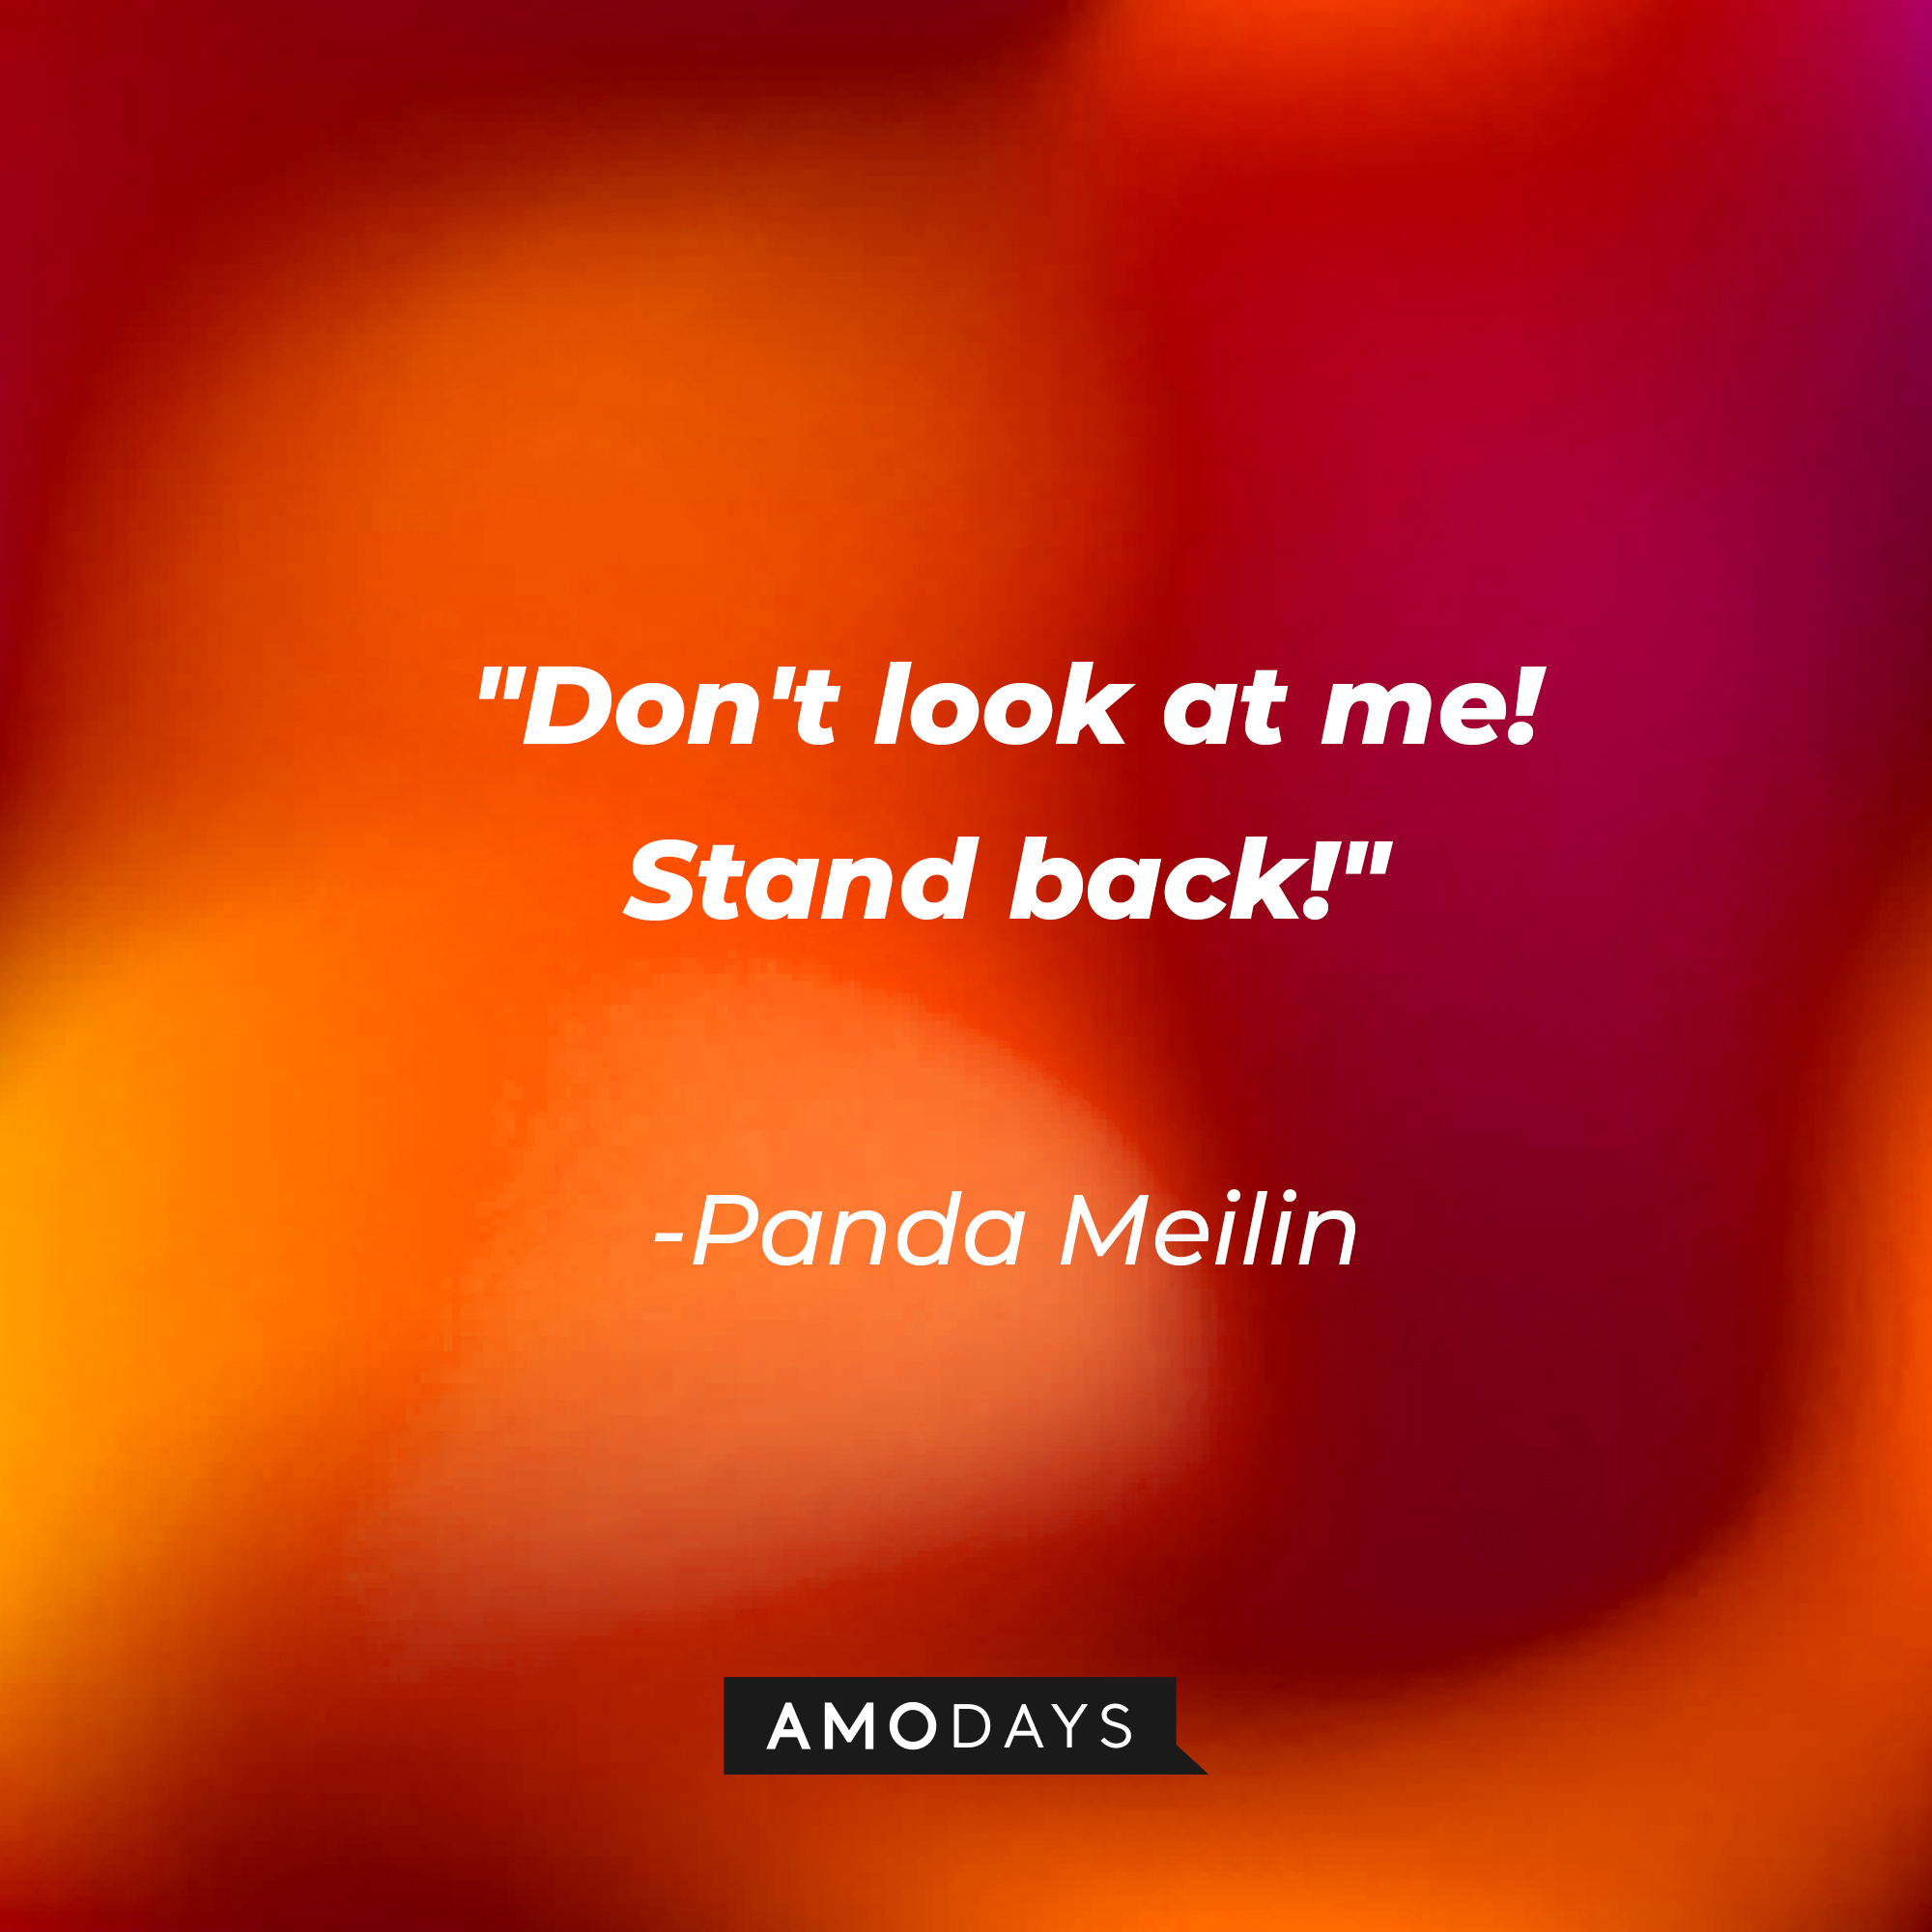 Panda Meilin's quote: "Don't look at me! Stand back!" | Source: AmoDays